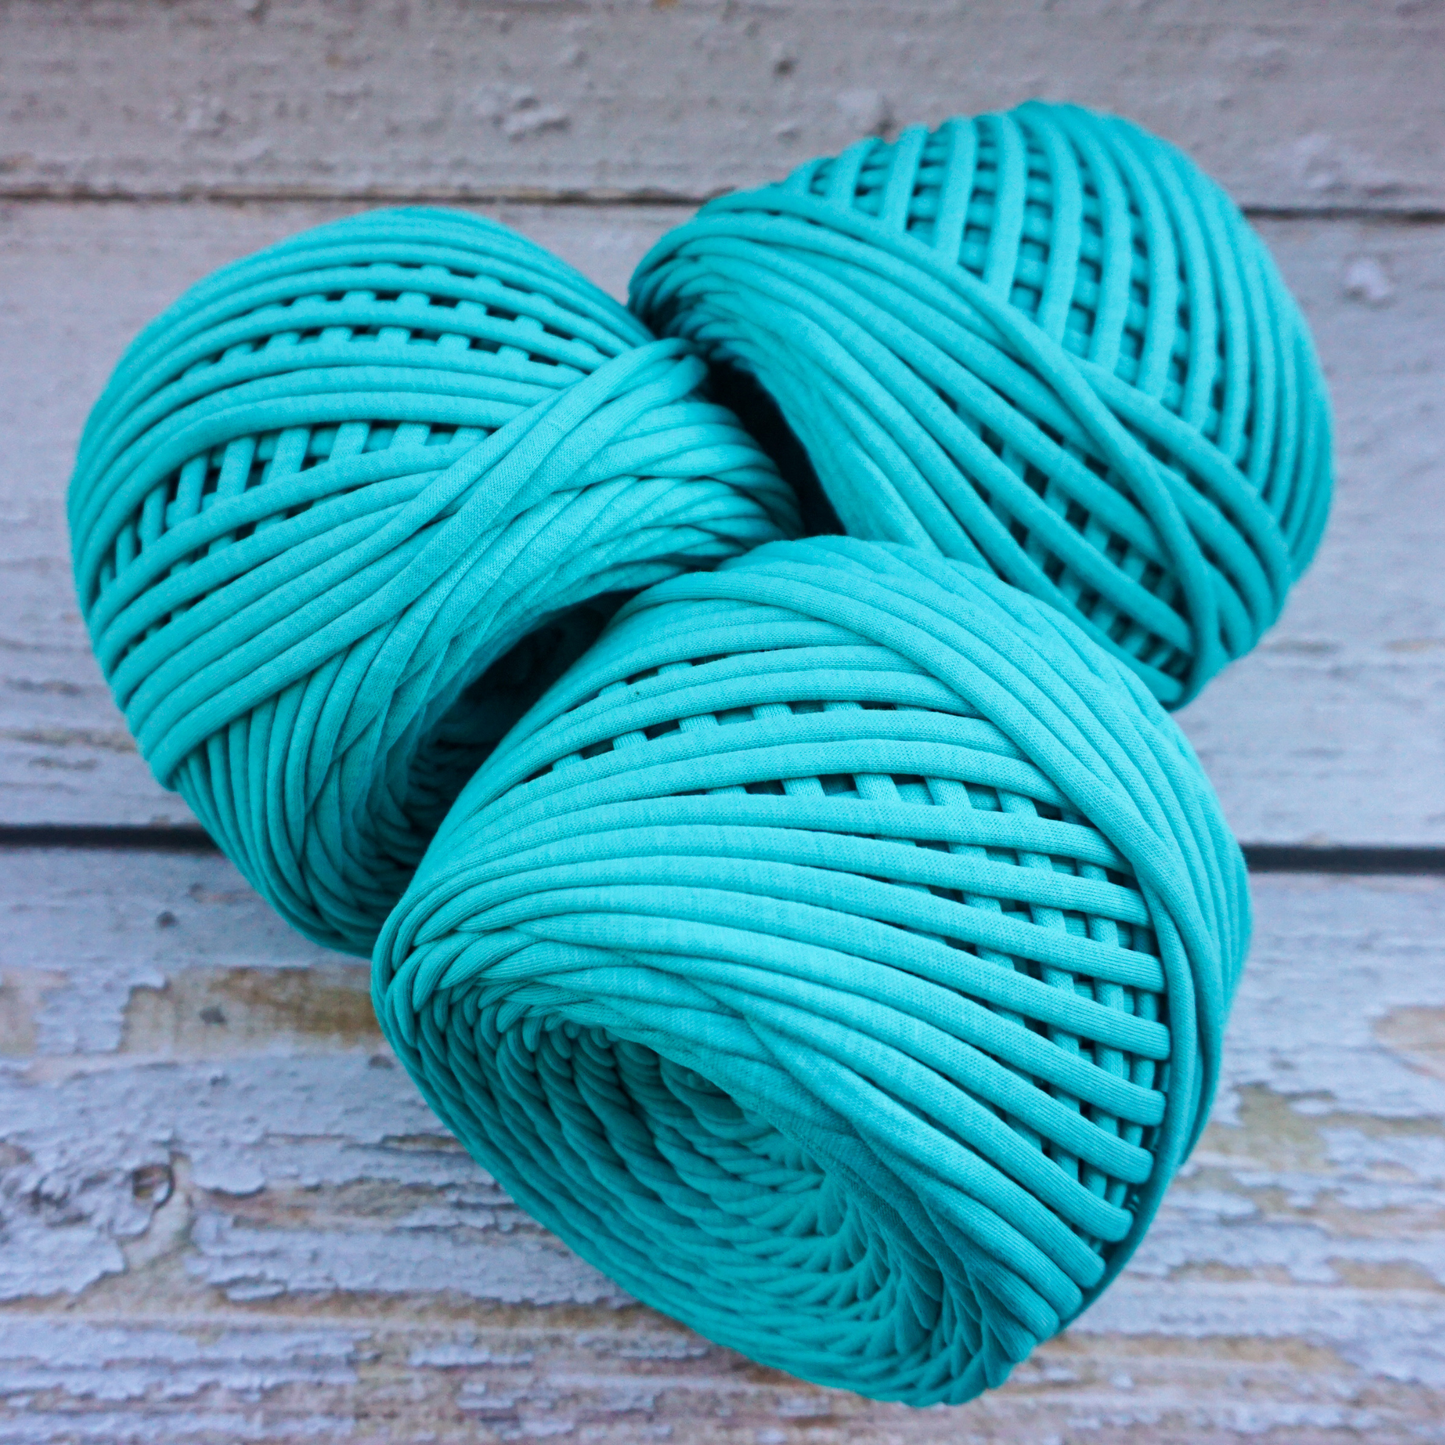 T-shirt yarn for crocheting baskets, bags, rugs and home decor. Emerald